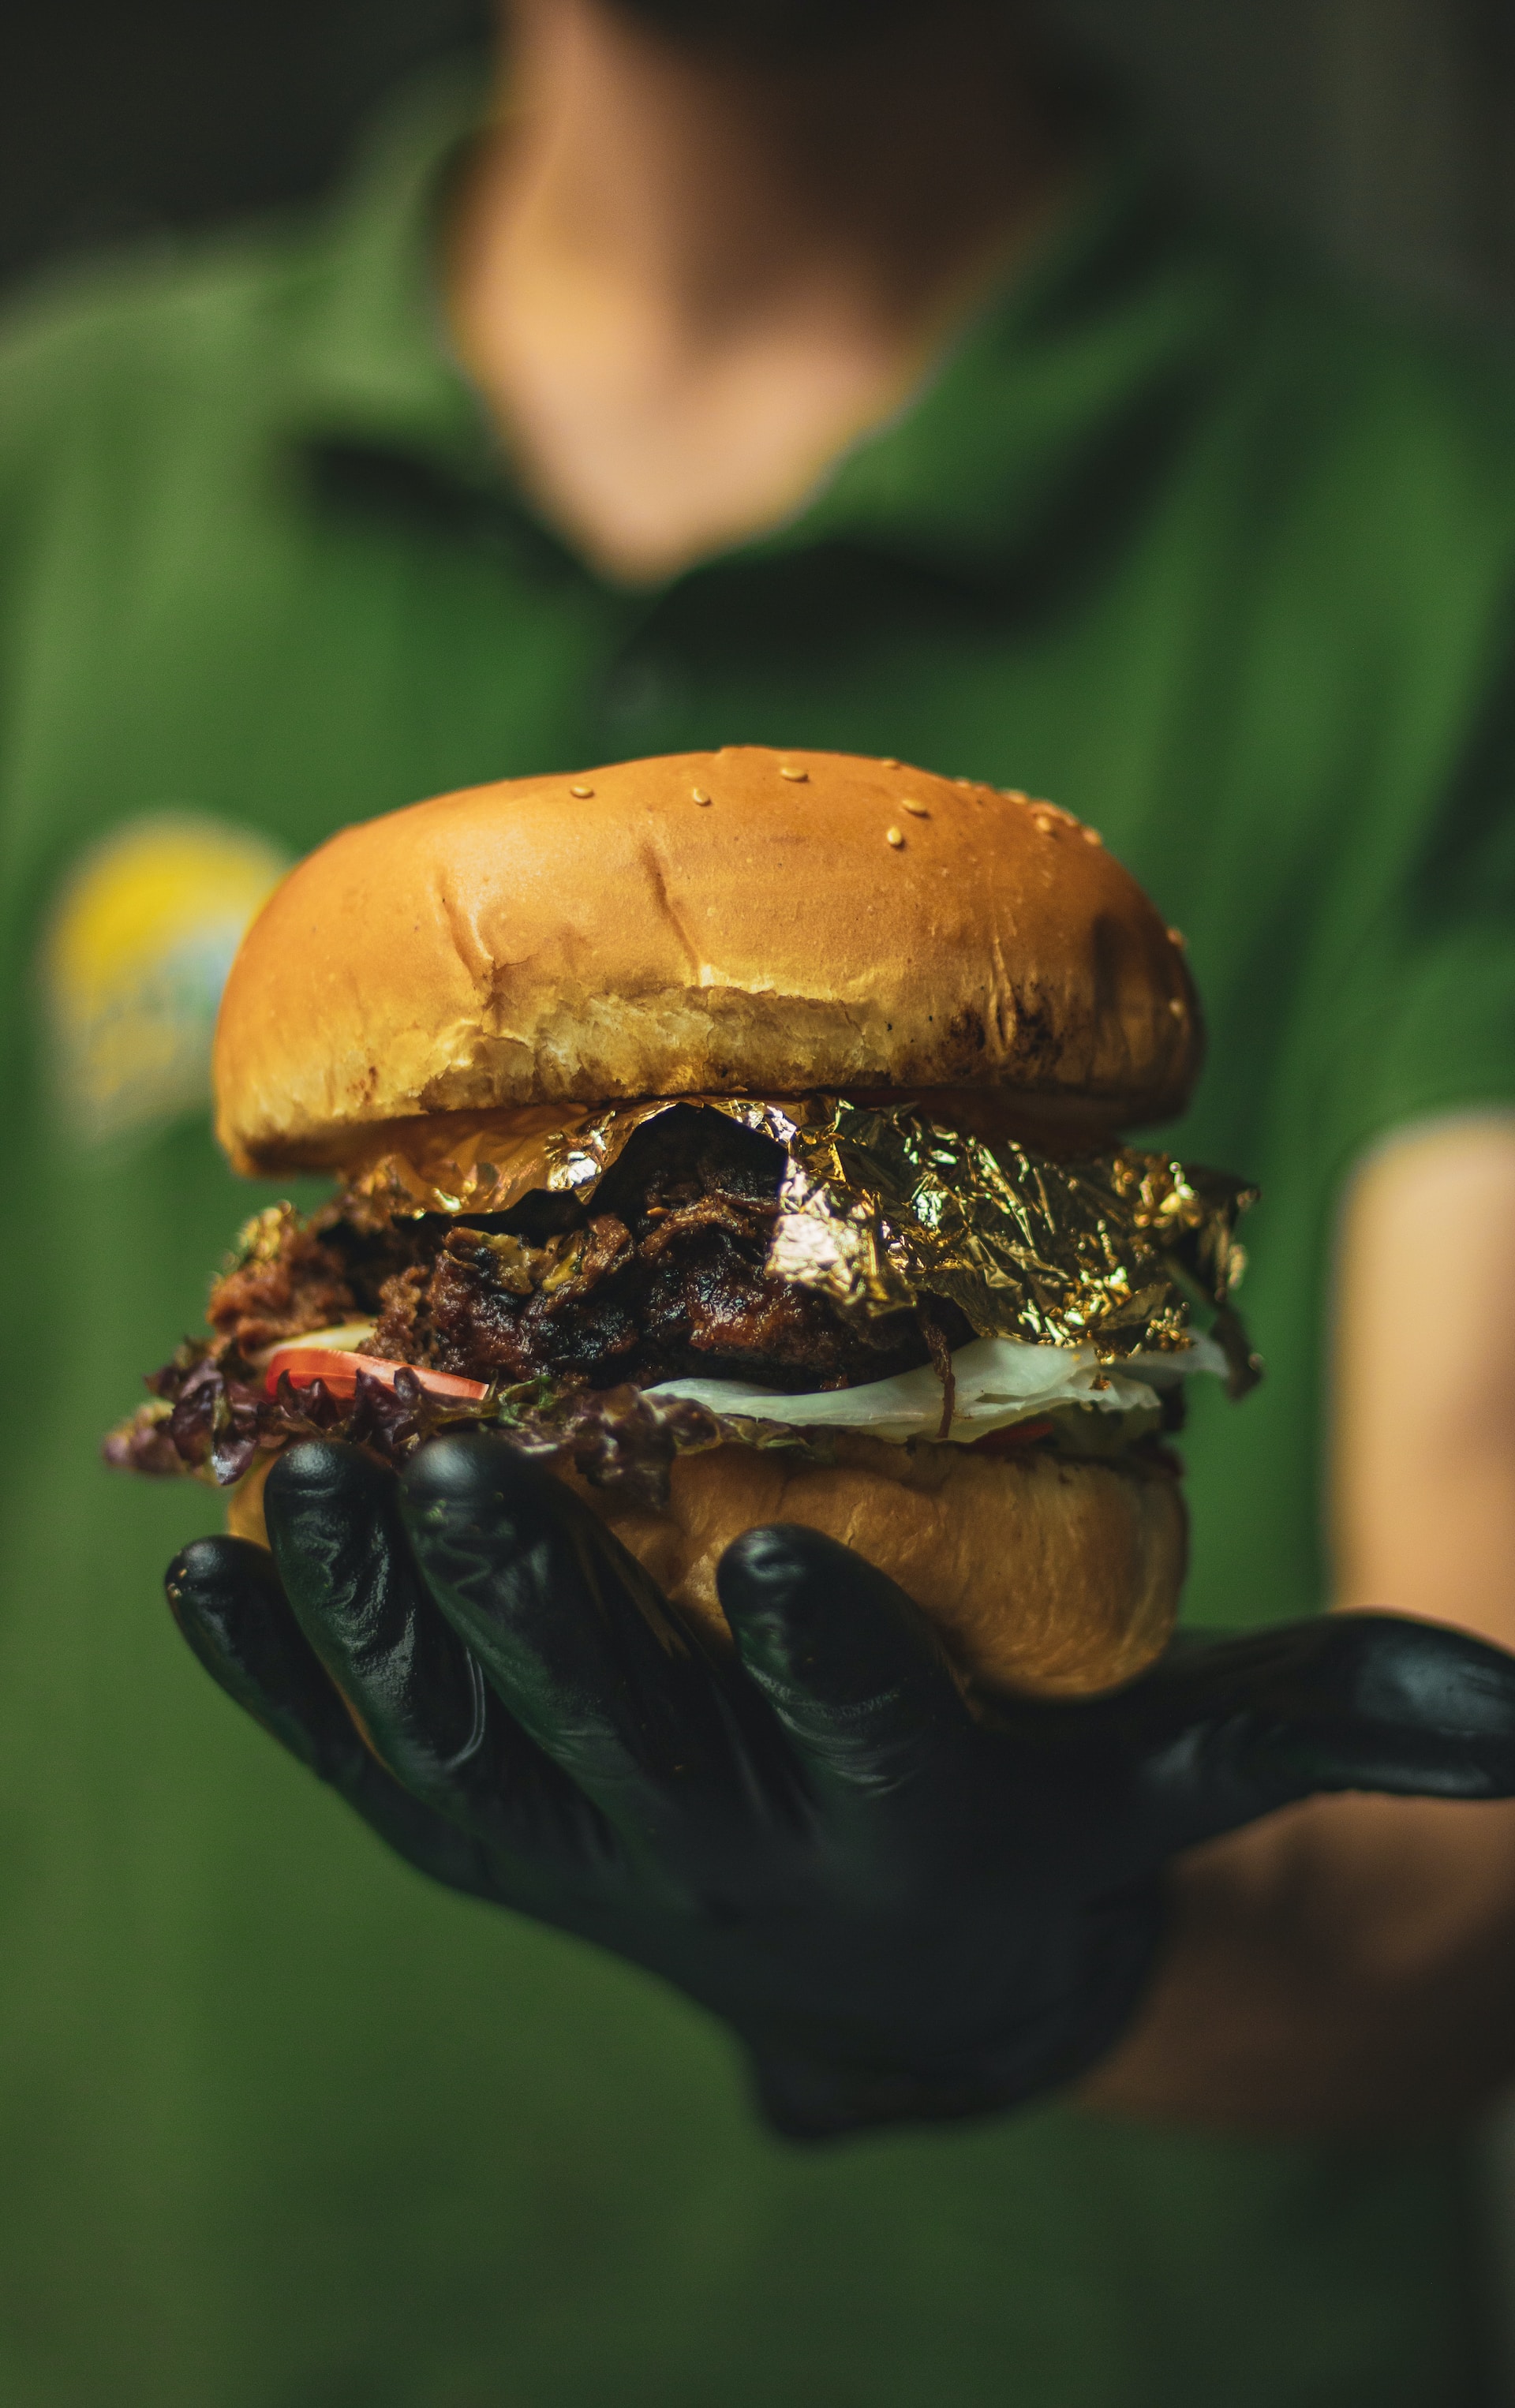 a person wearing a black disposable nitrile glove holding a hamburger with consipcuous gold leaf on top of the patty